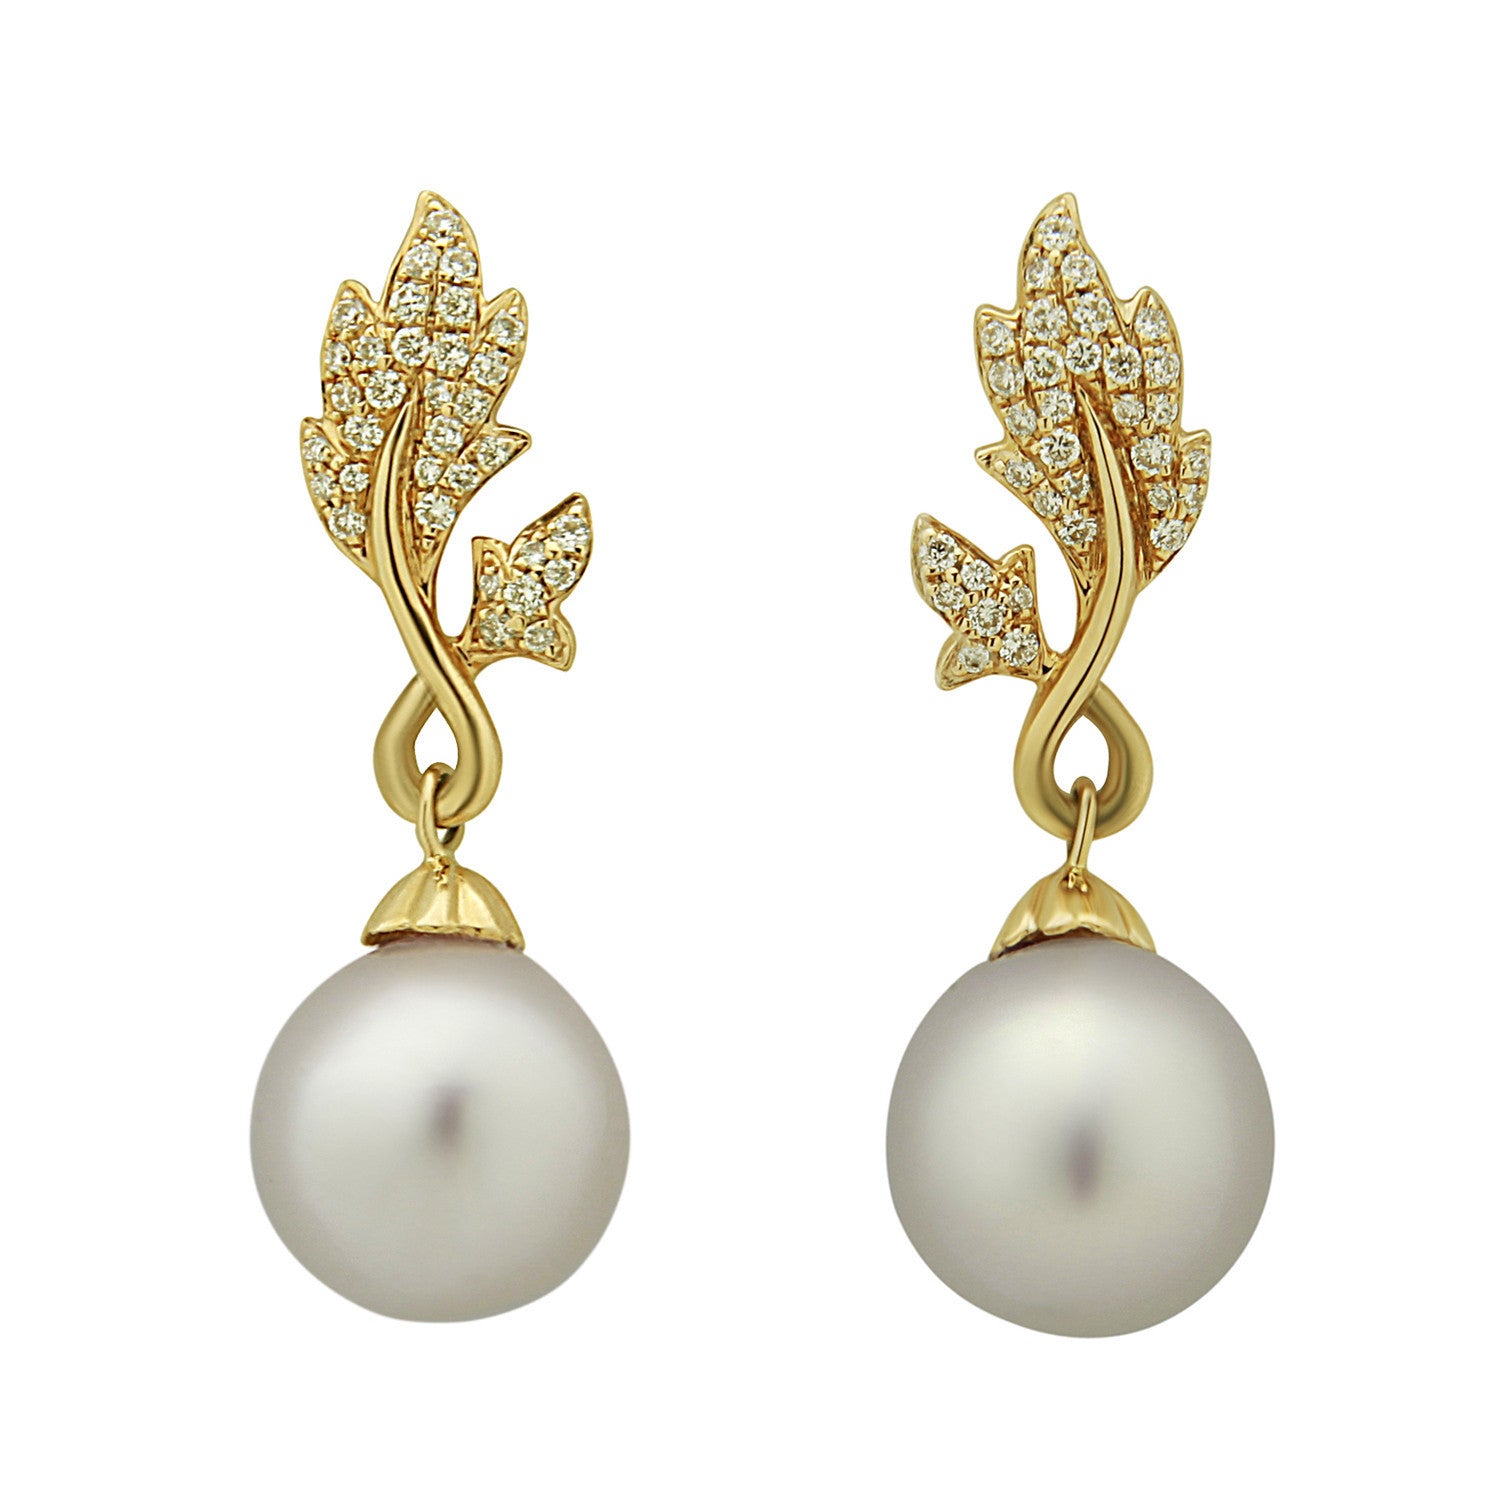 Leaf Collection 10-11mm White South Sea Pearl and Diamond Earrings